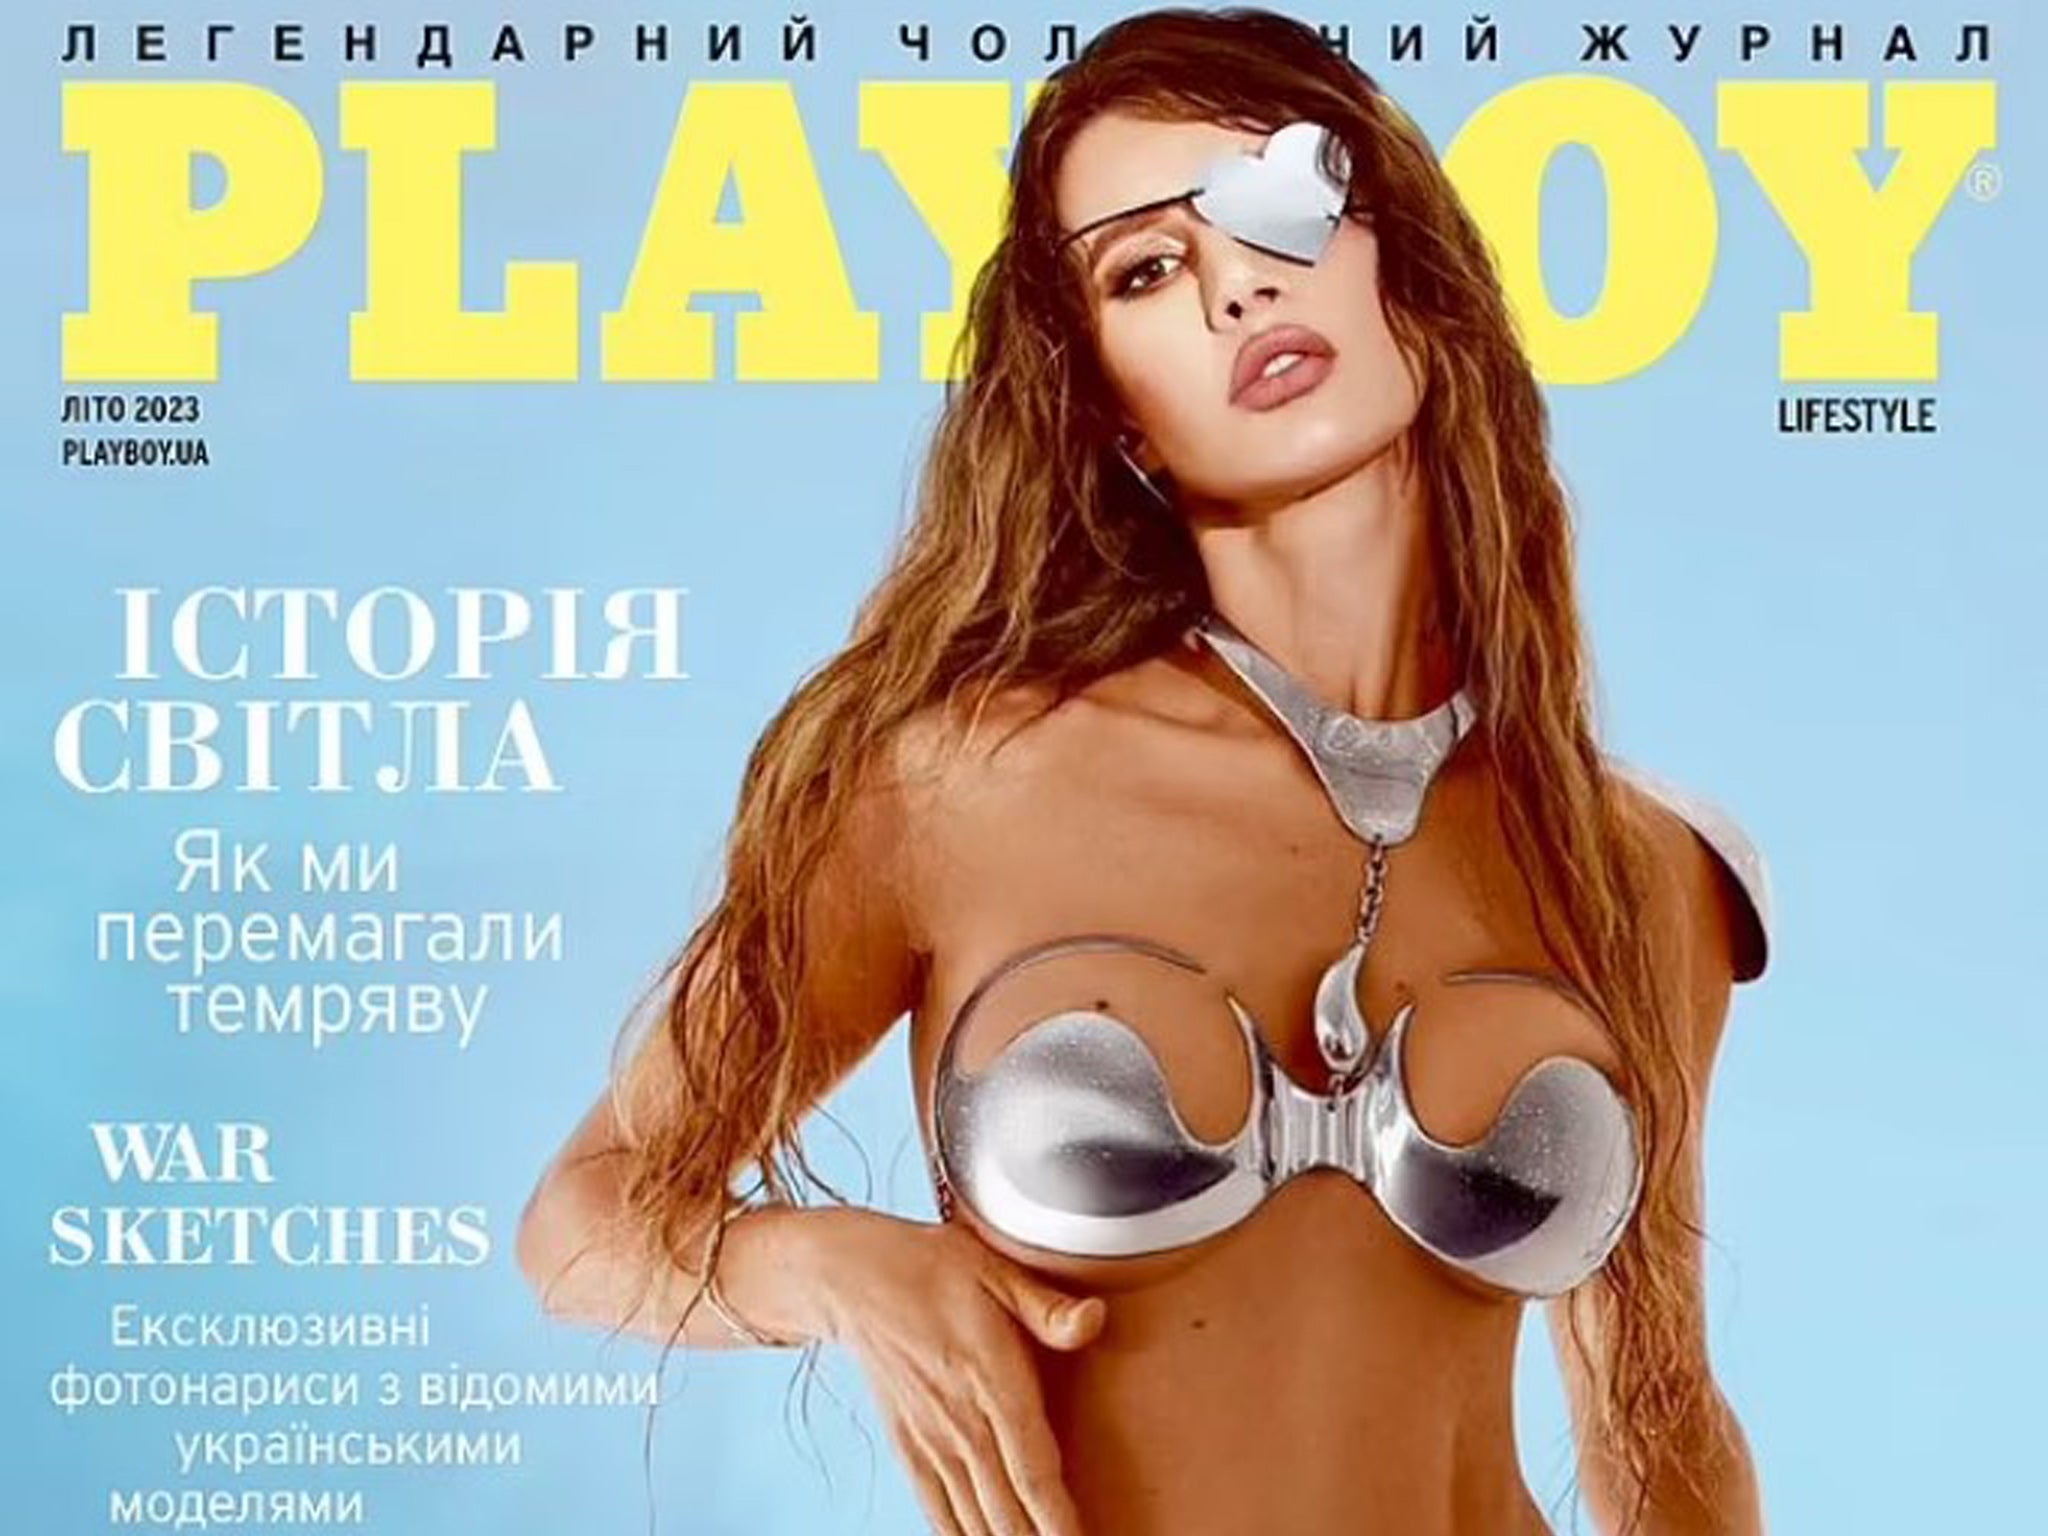 Iryna Bilotserkovets was featured on the first printed cover of Playboy in 18 months after going digital during the pandemic